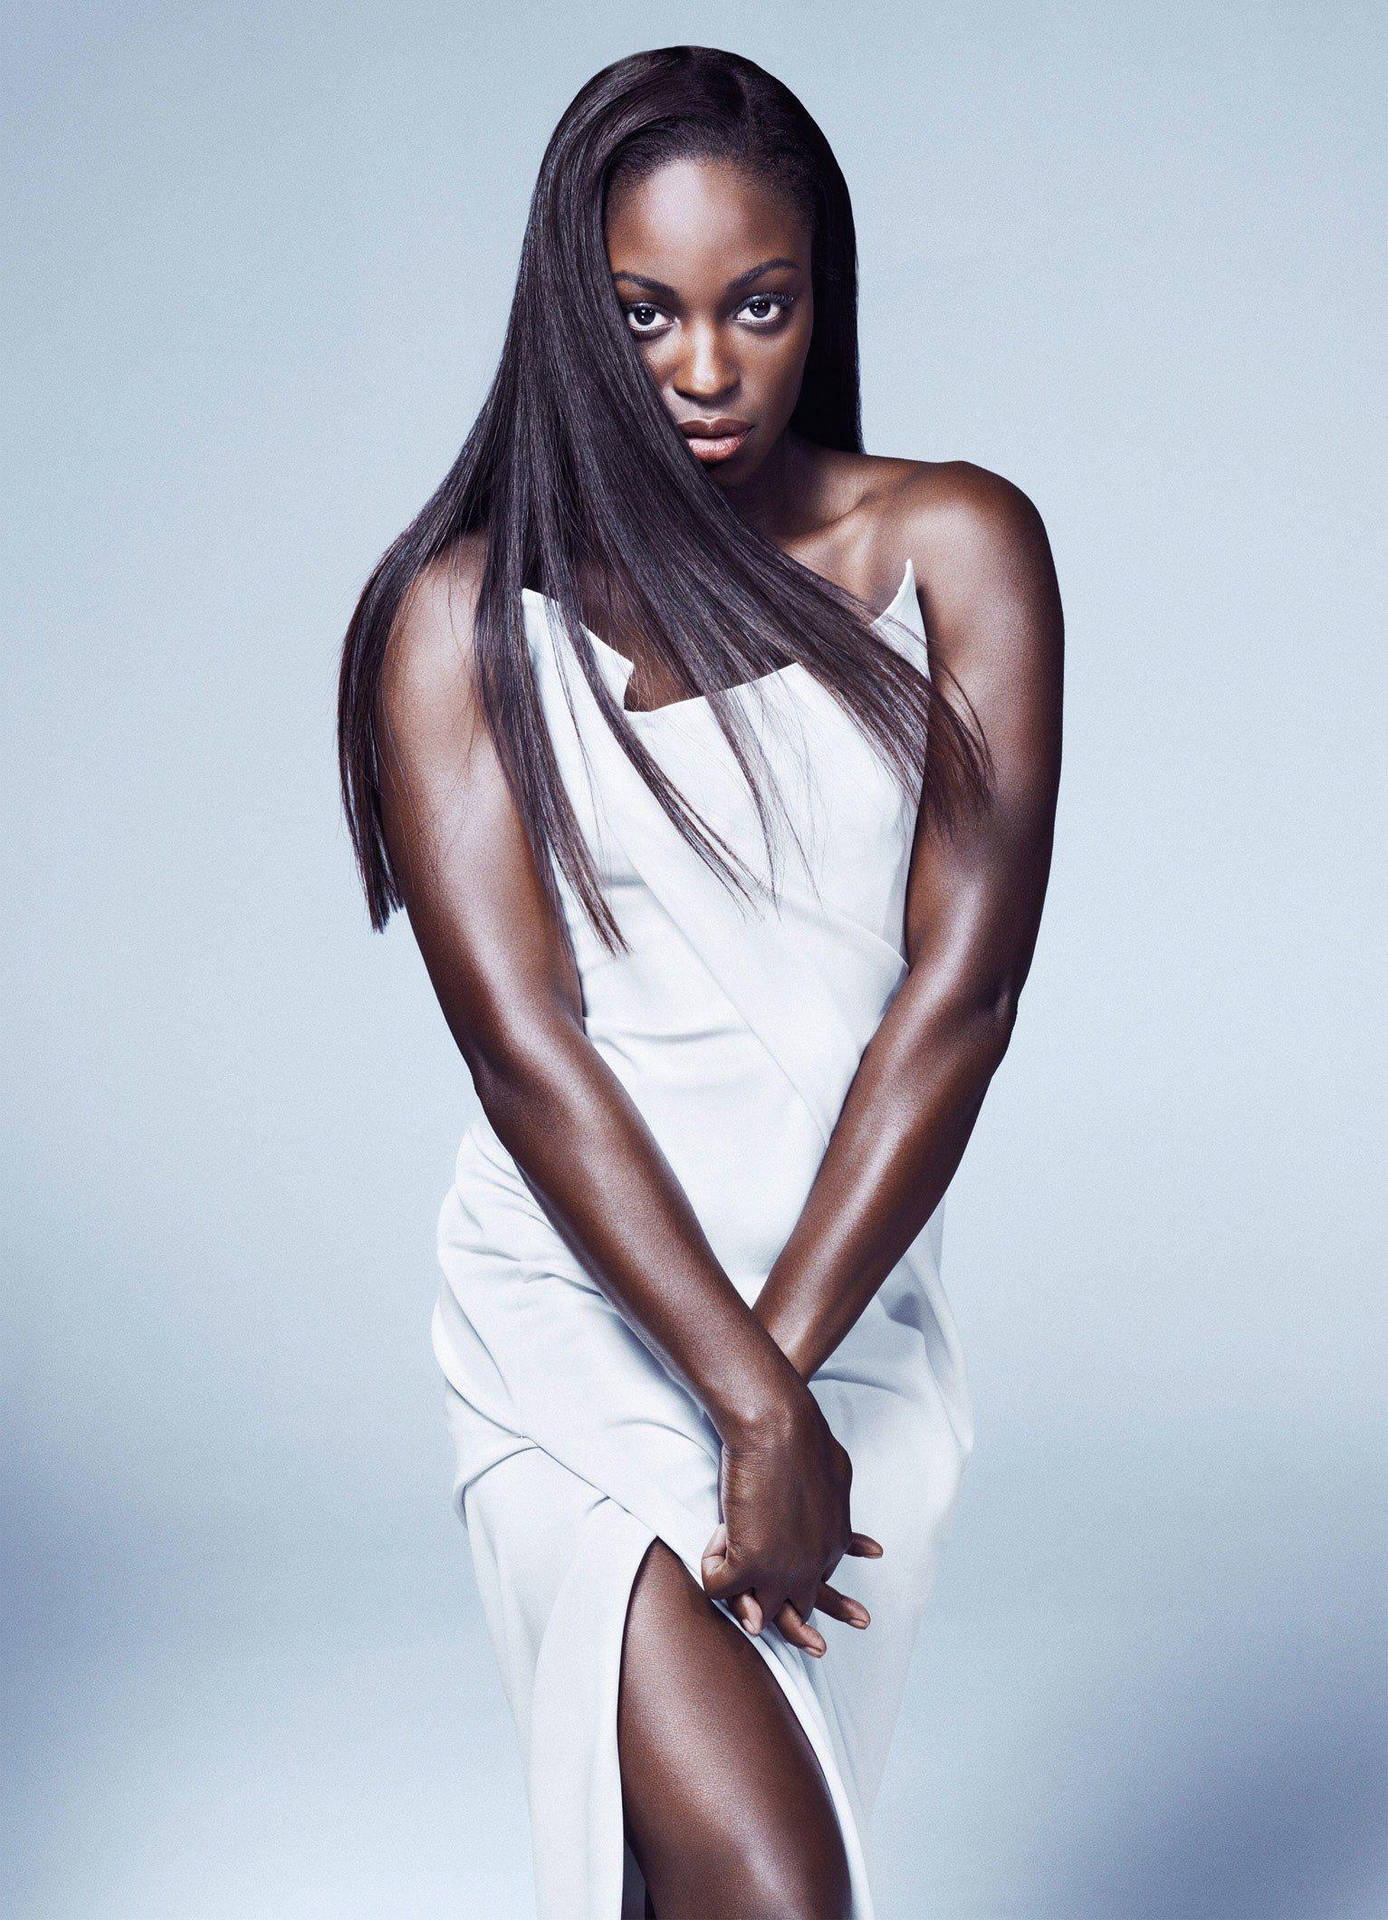 Sloane Stephens In A White Dress Background